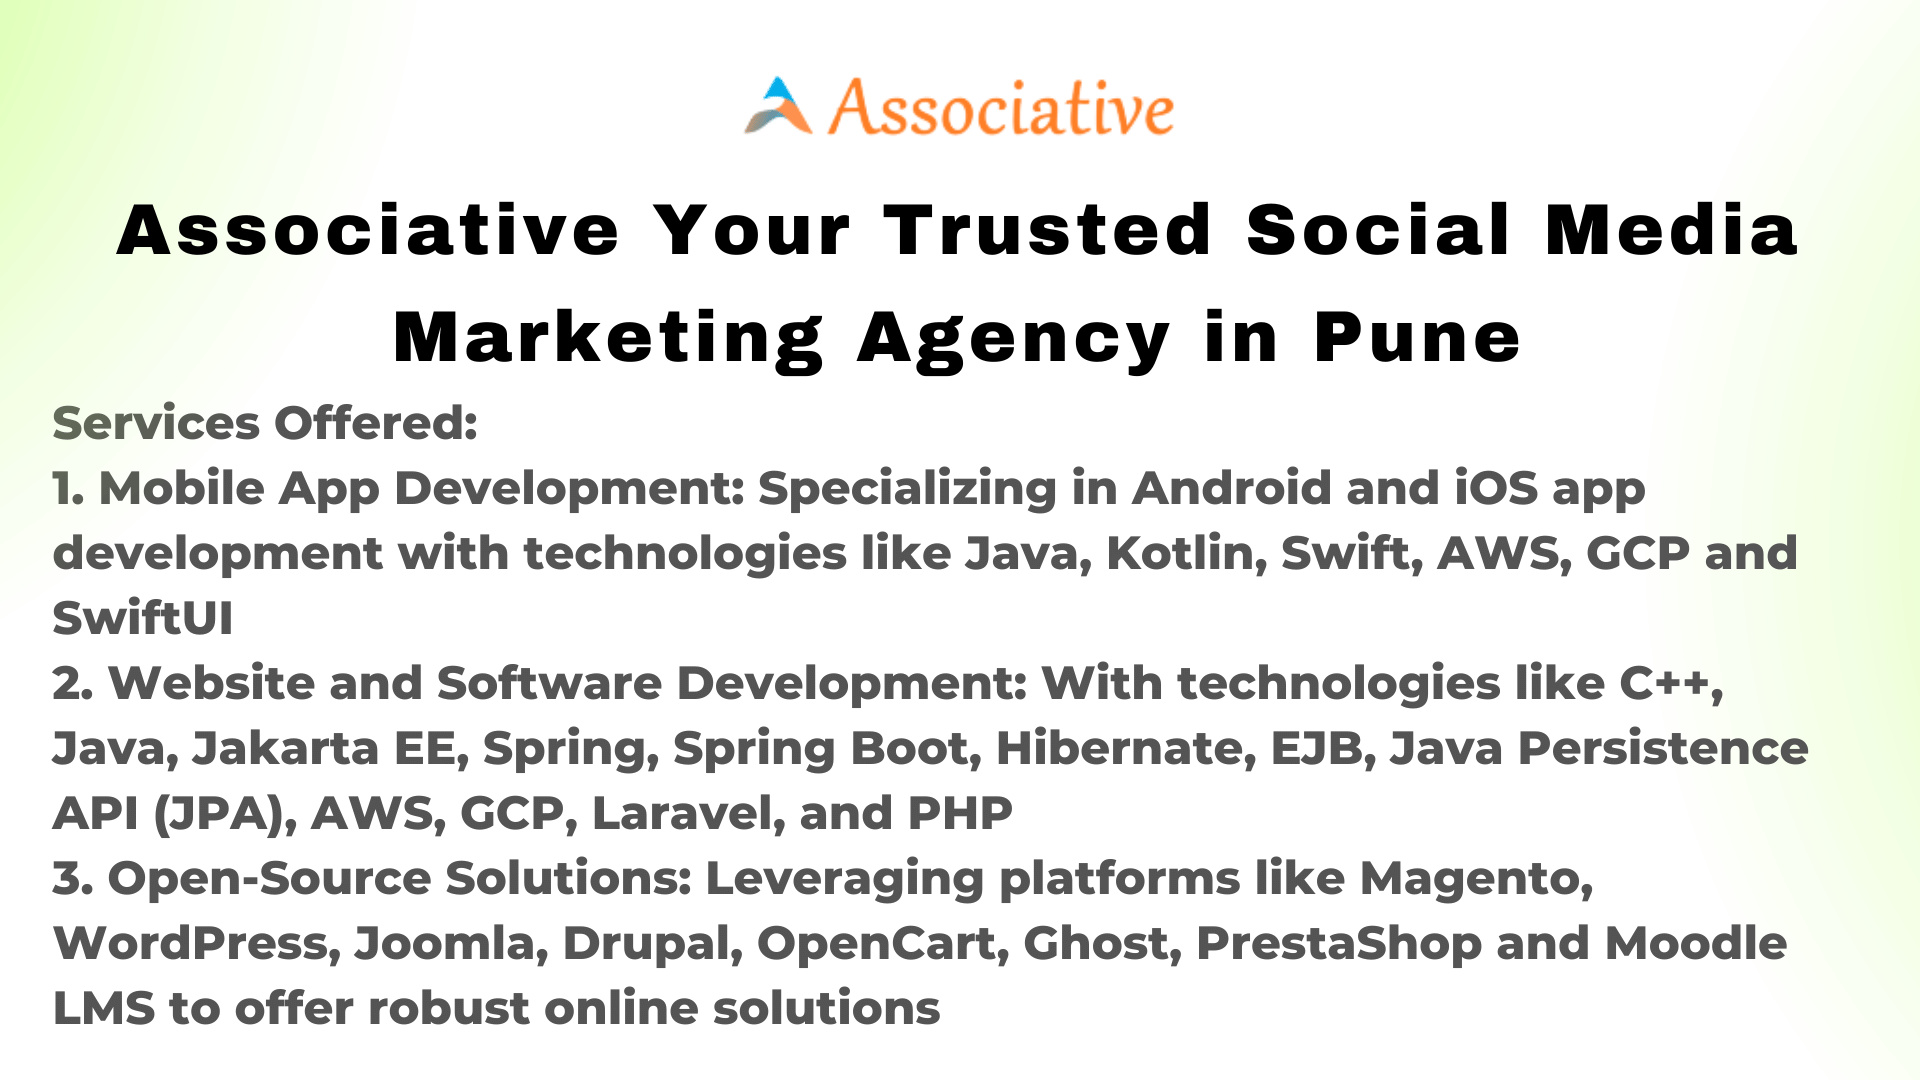 Associative Your Trusted Social Media Marketing Agency in Pune